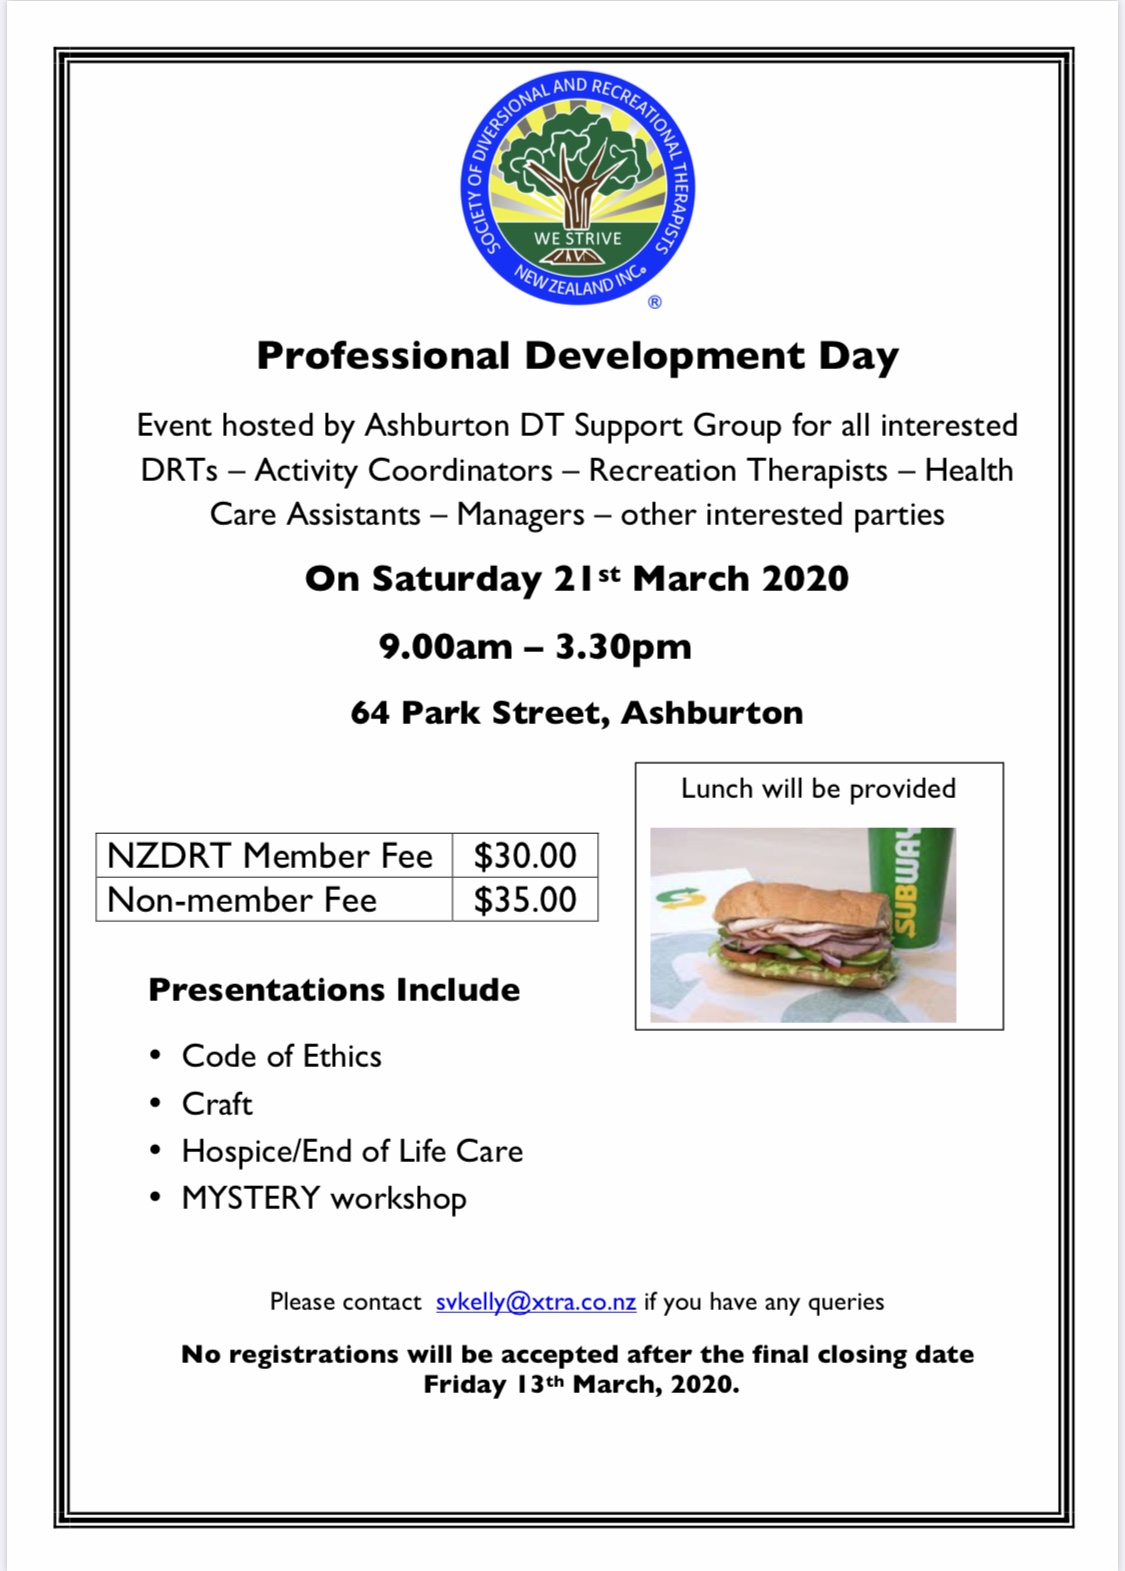 PROFESSIONAL DEVELOPMENT DAY  – Hosted by Ashburton DT Support Group